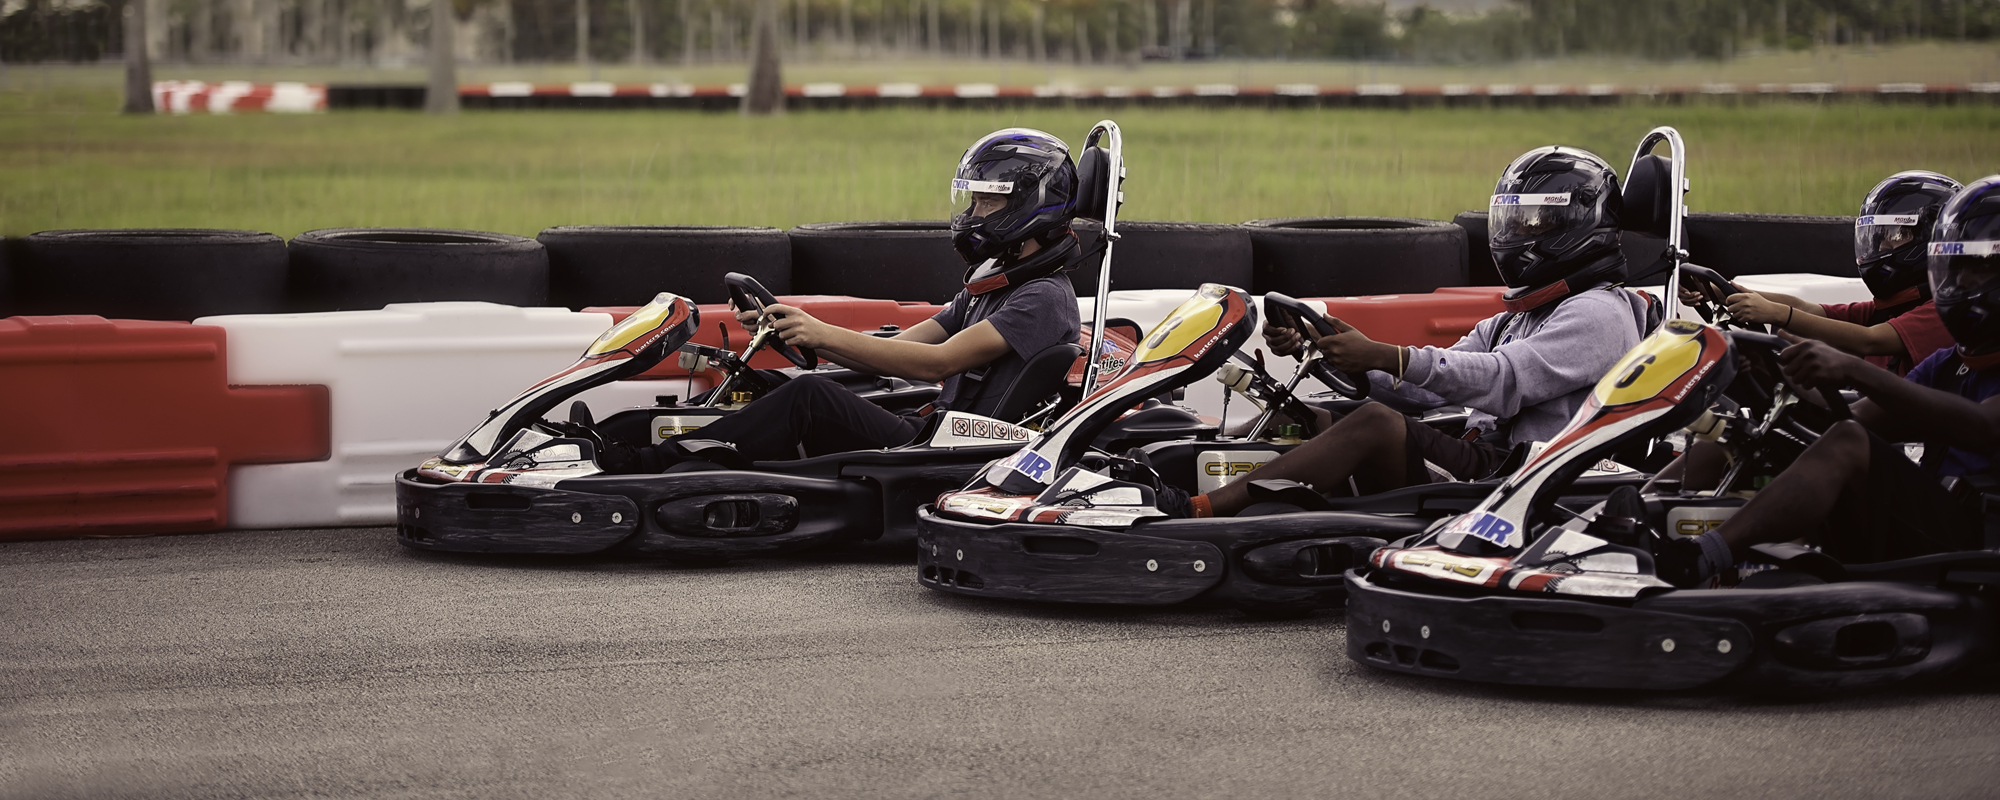 45 MPH Arrive-and-Drive Karting